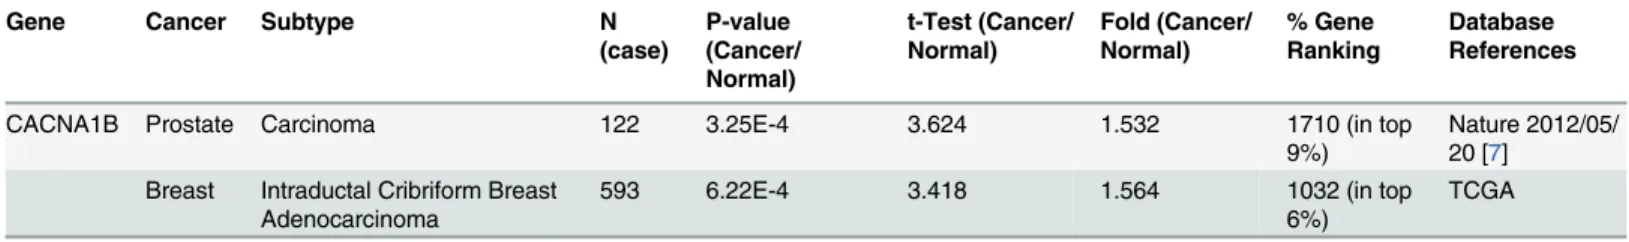 Table 4. N-type calcium channel expression in cancer.